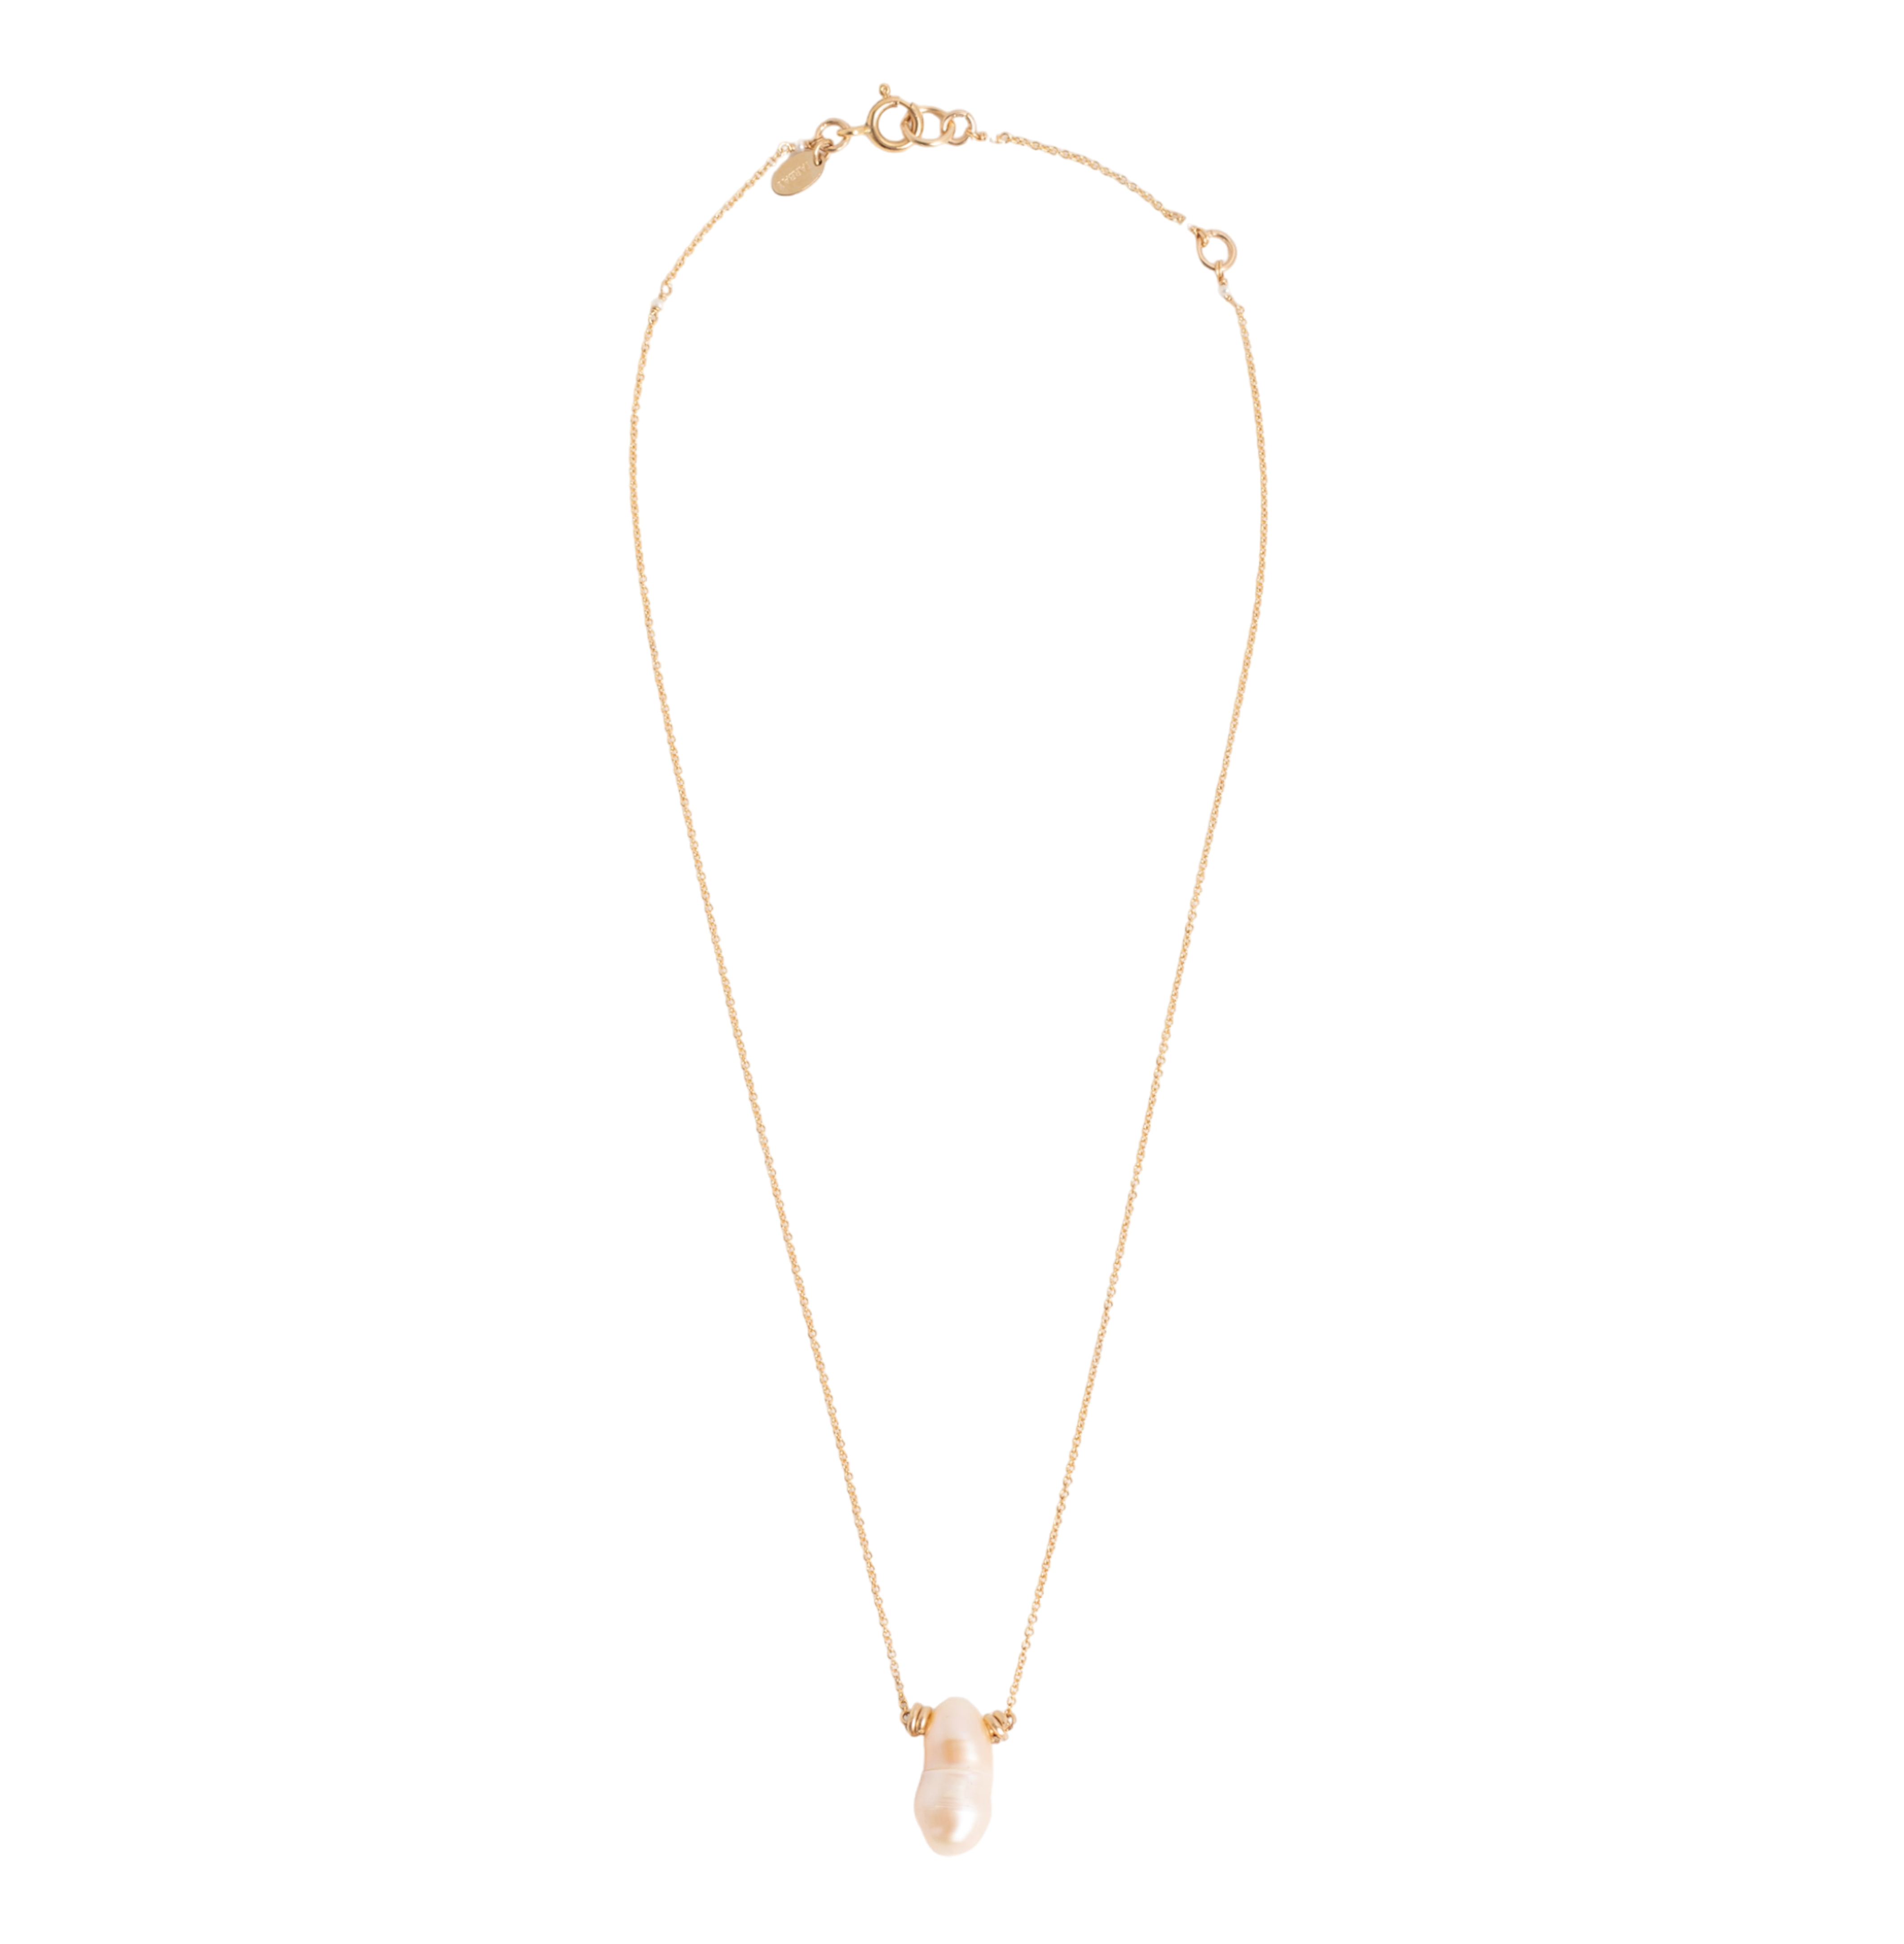 Gema #1 Necklace (18-20mm) - Salmon Pearl Necklaces TARBAY   